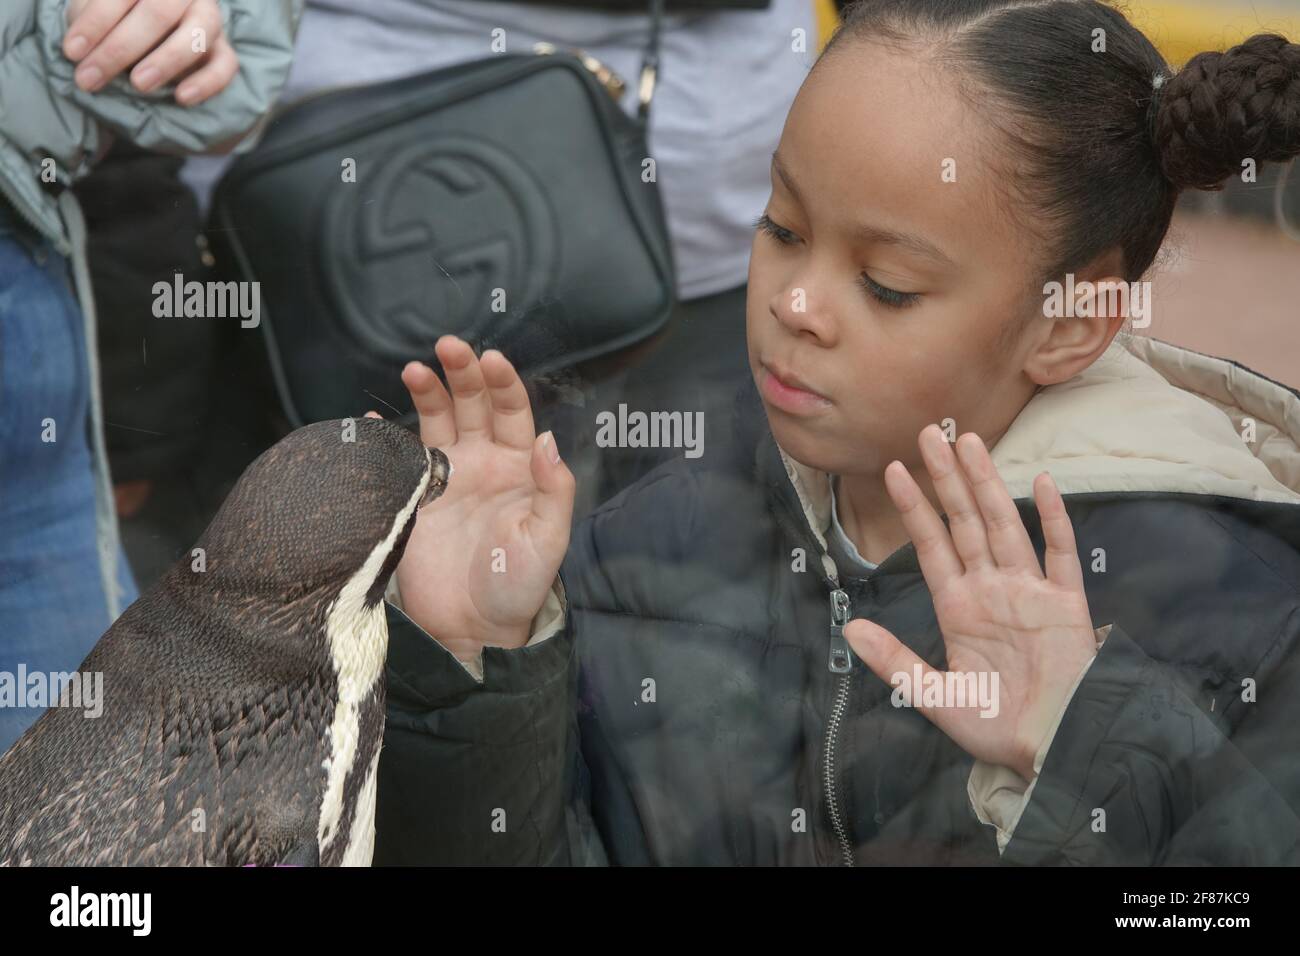 London, UK. 12th April 2021. Harley enjoys the penguins at ZSL London Zoo on opening day following covid19 restrictions. Credit: Bradley Taylor / Alamy Live News Stock Photo